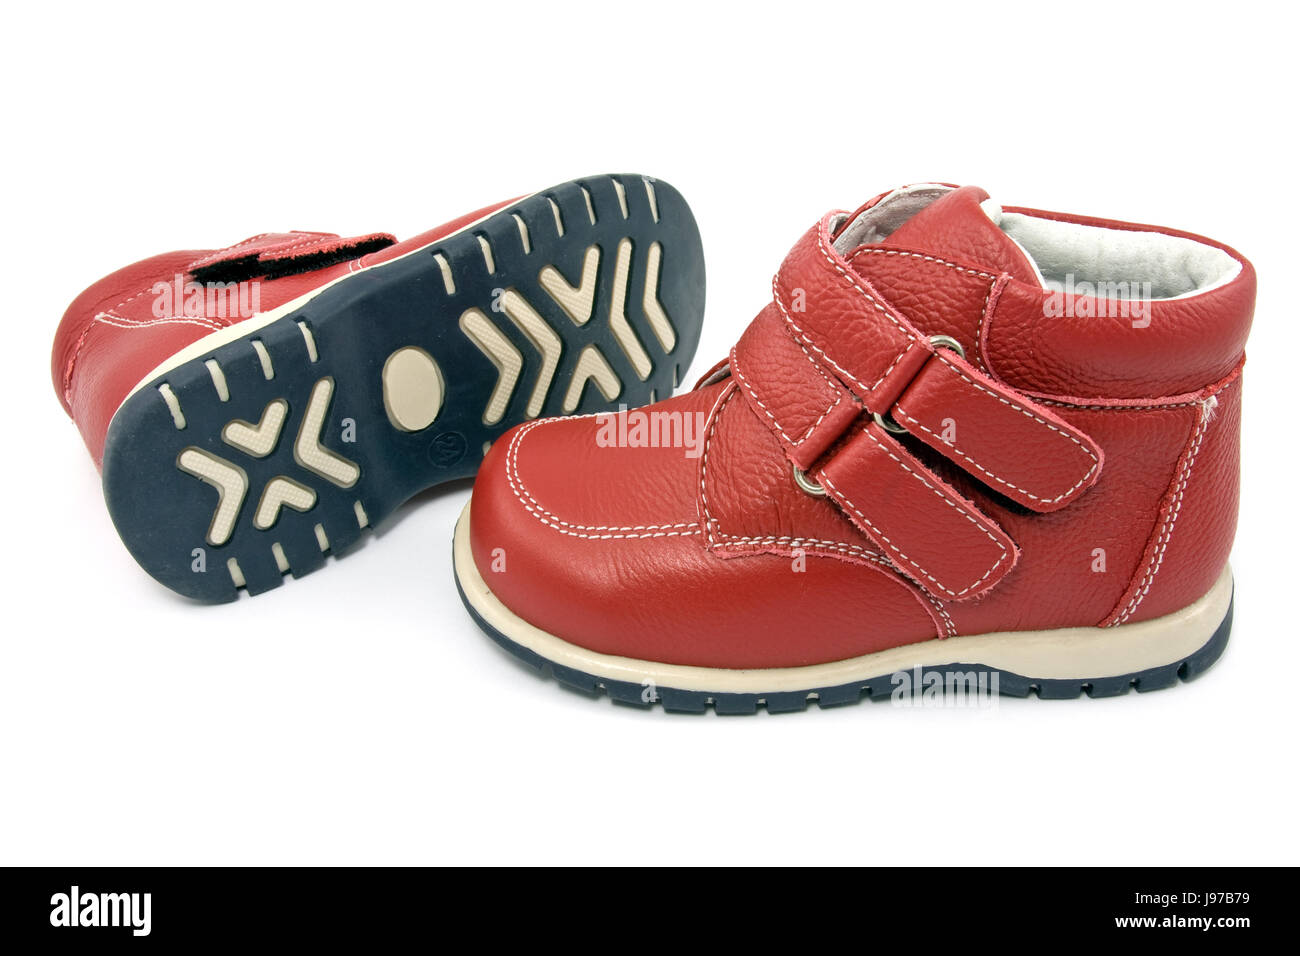 leather, protect, protection, child, pair, shoe, design, walk, go, going, Stock Photo